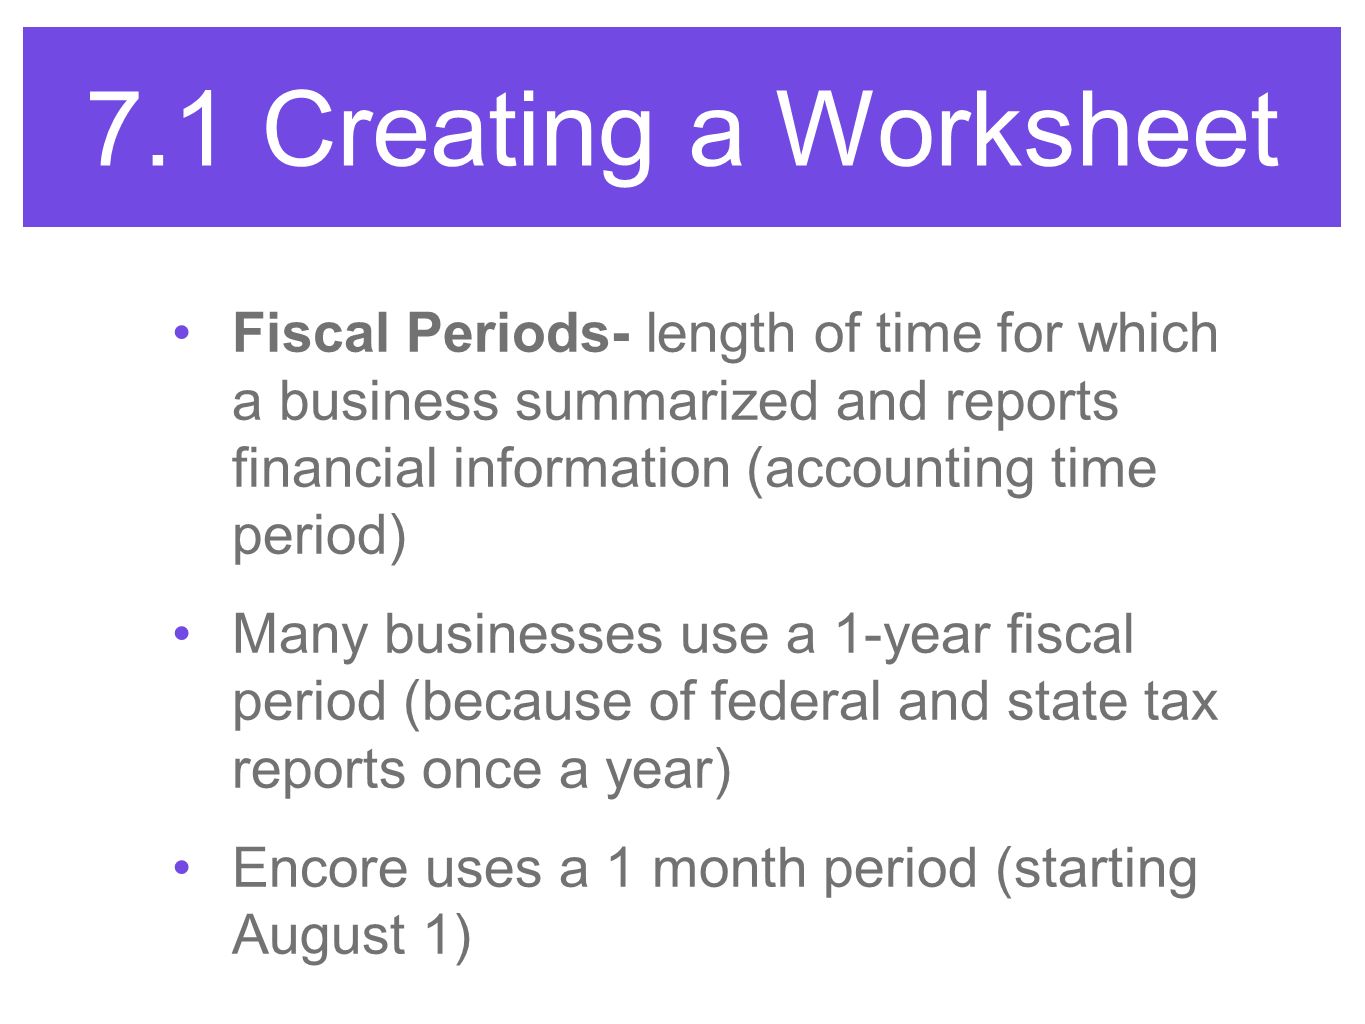 7.1 Creating a Worksheet Fiscal Periods- length of time for which a business summarized and reports financial information (accounting time period)